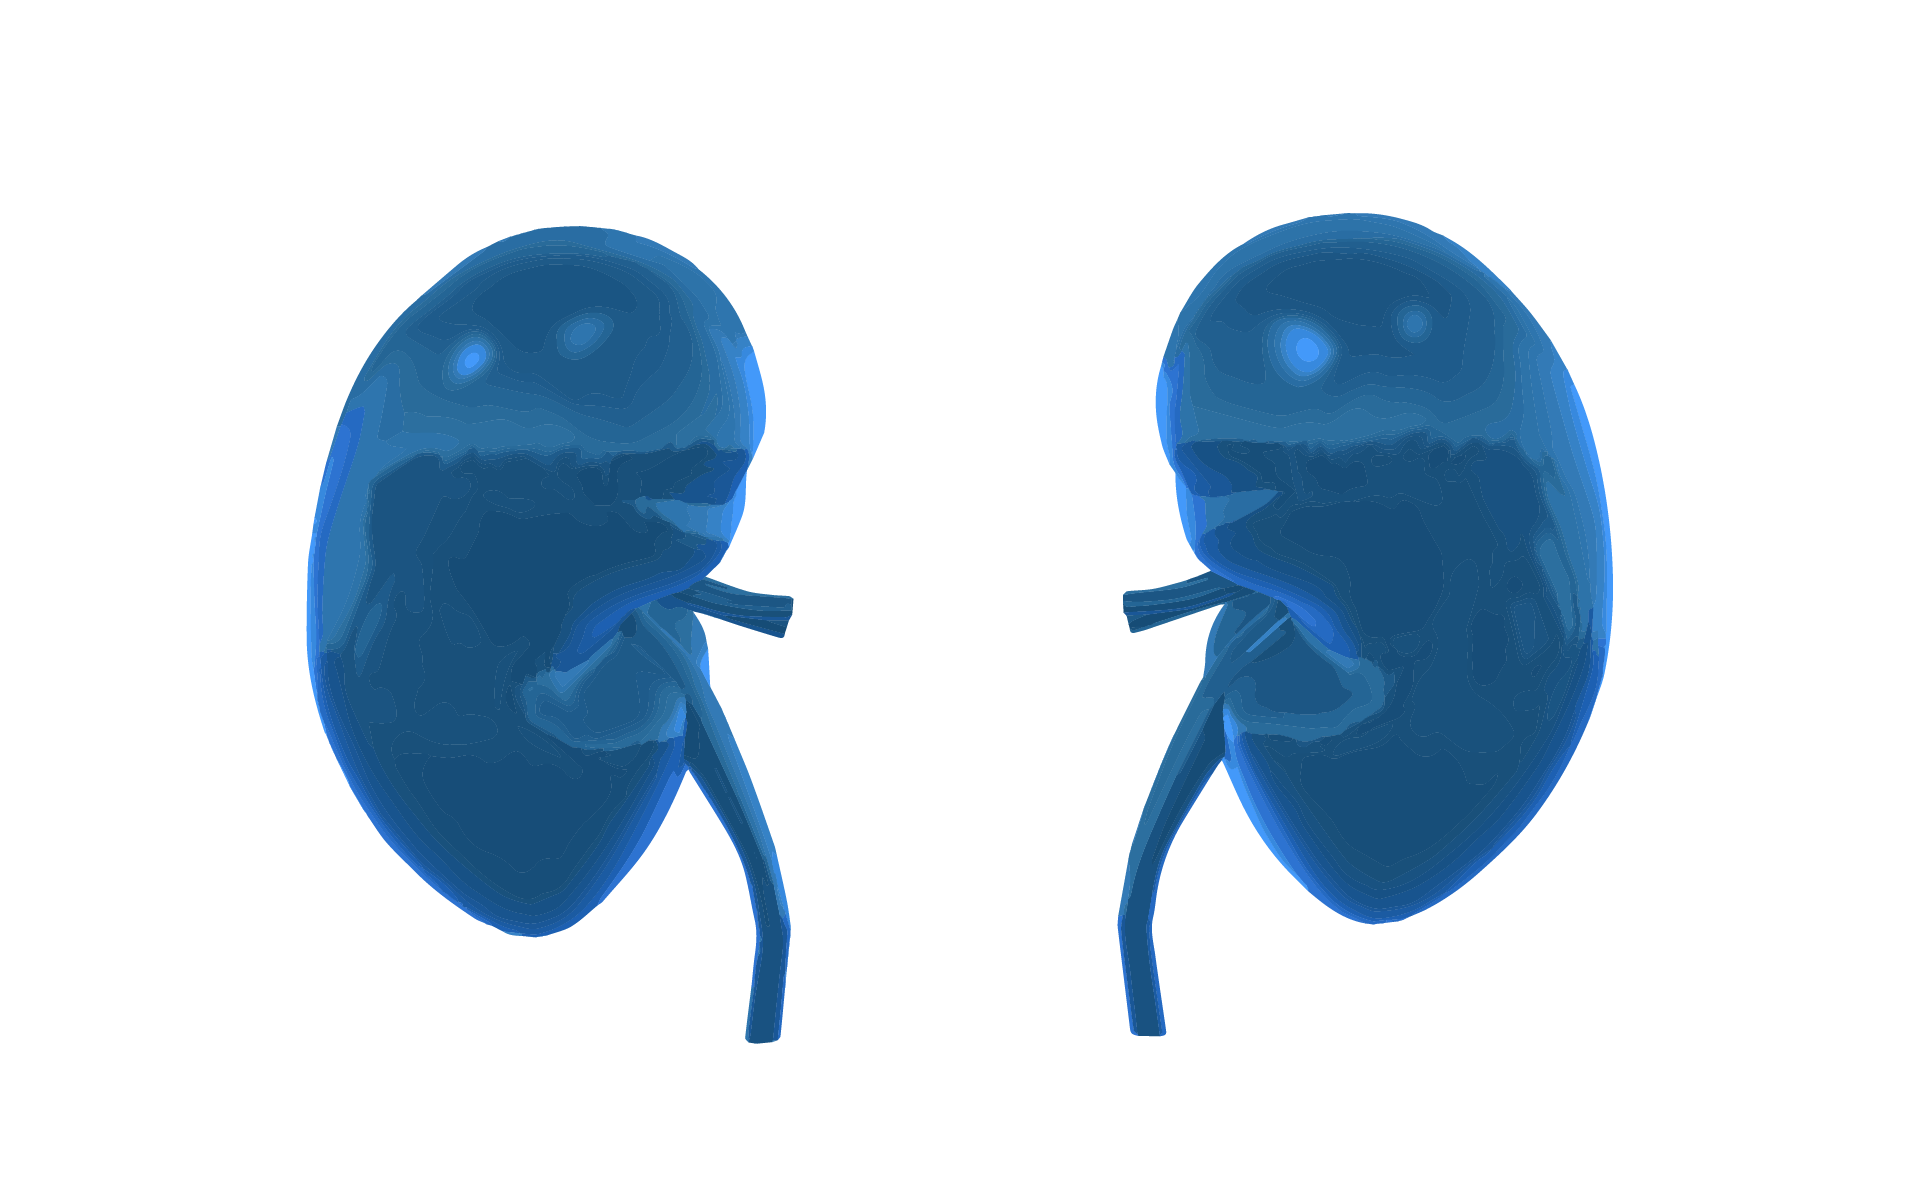 A 3D graphic image of the human kidneys